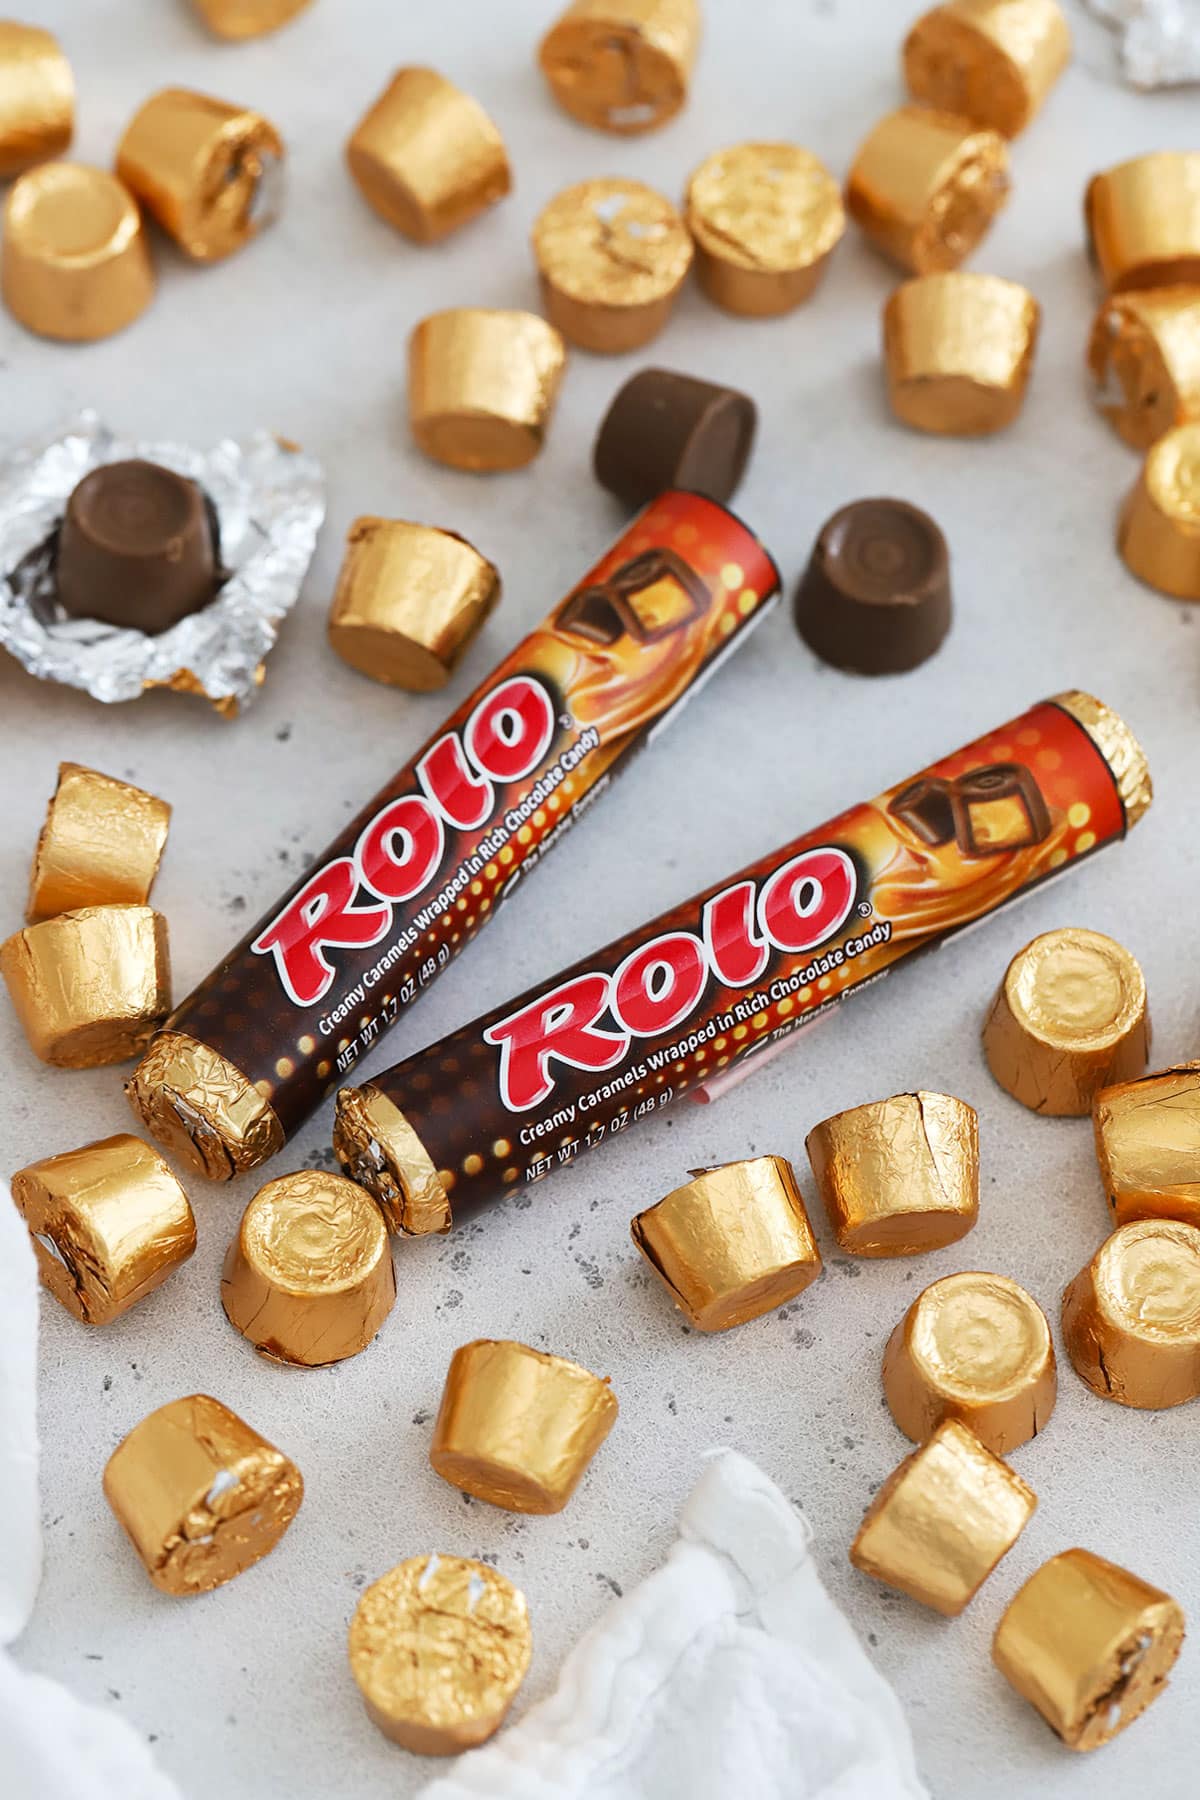 Are Rolos Gluten-Free?